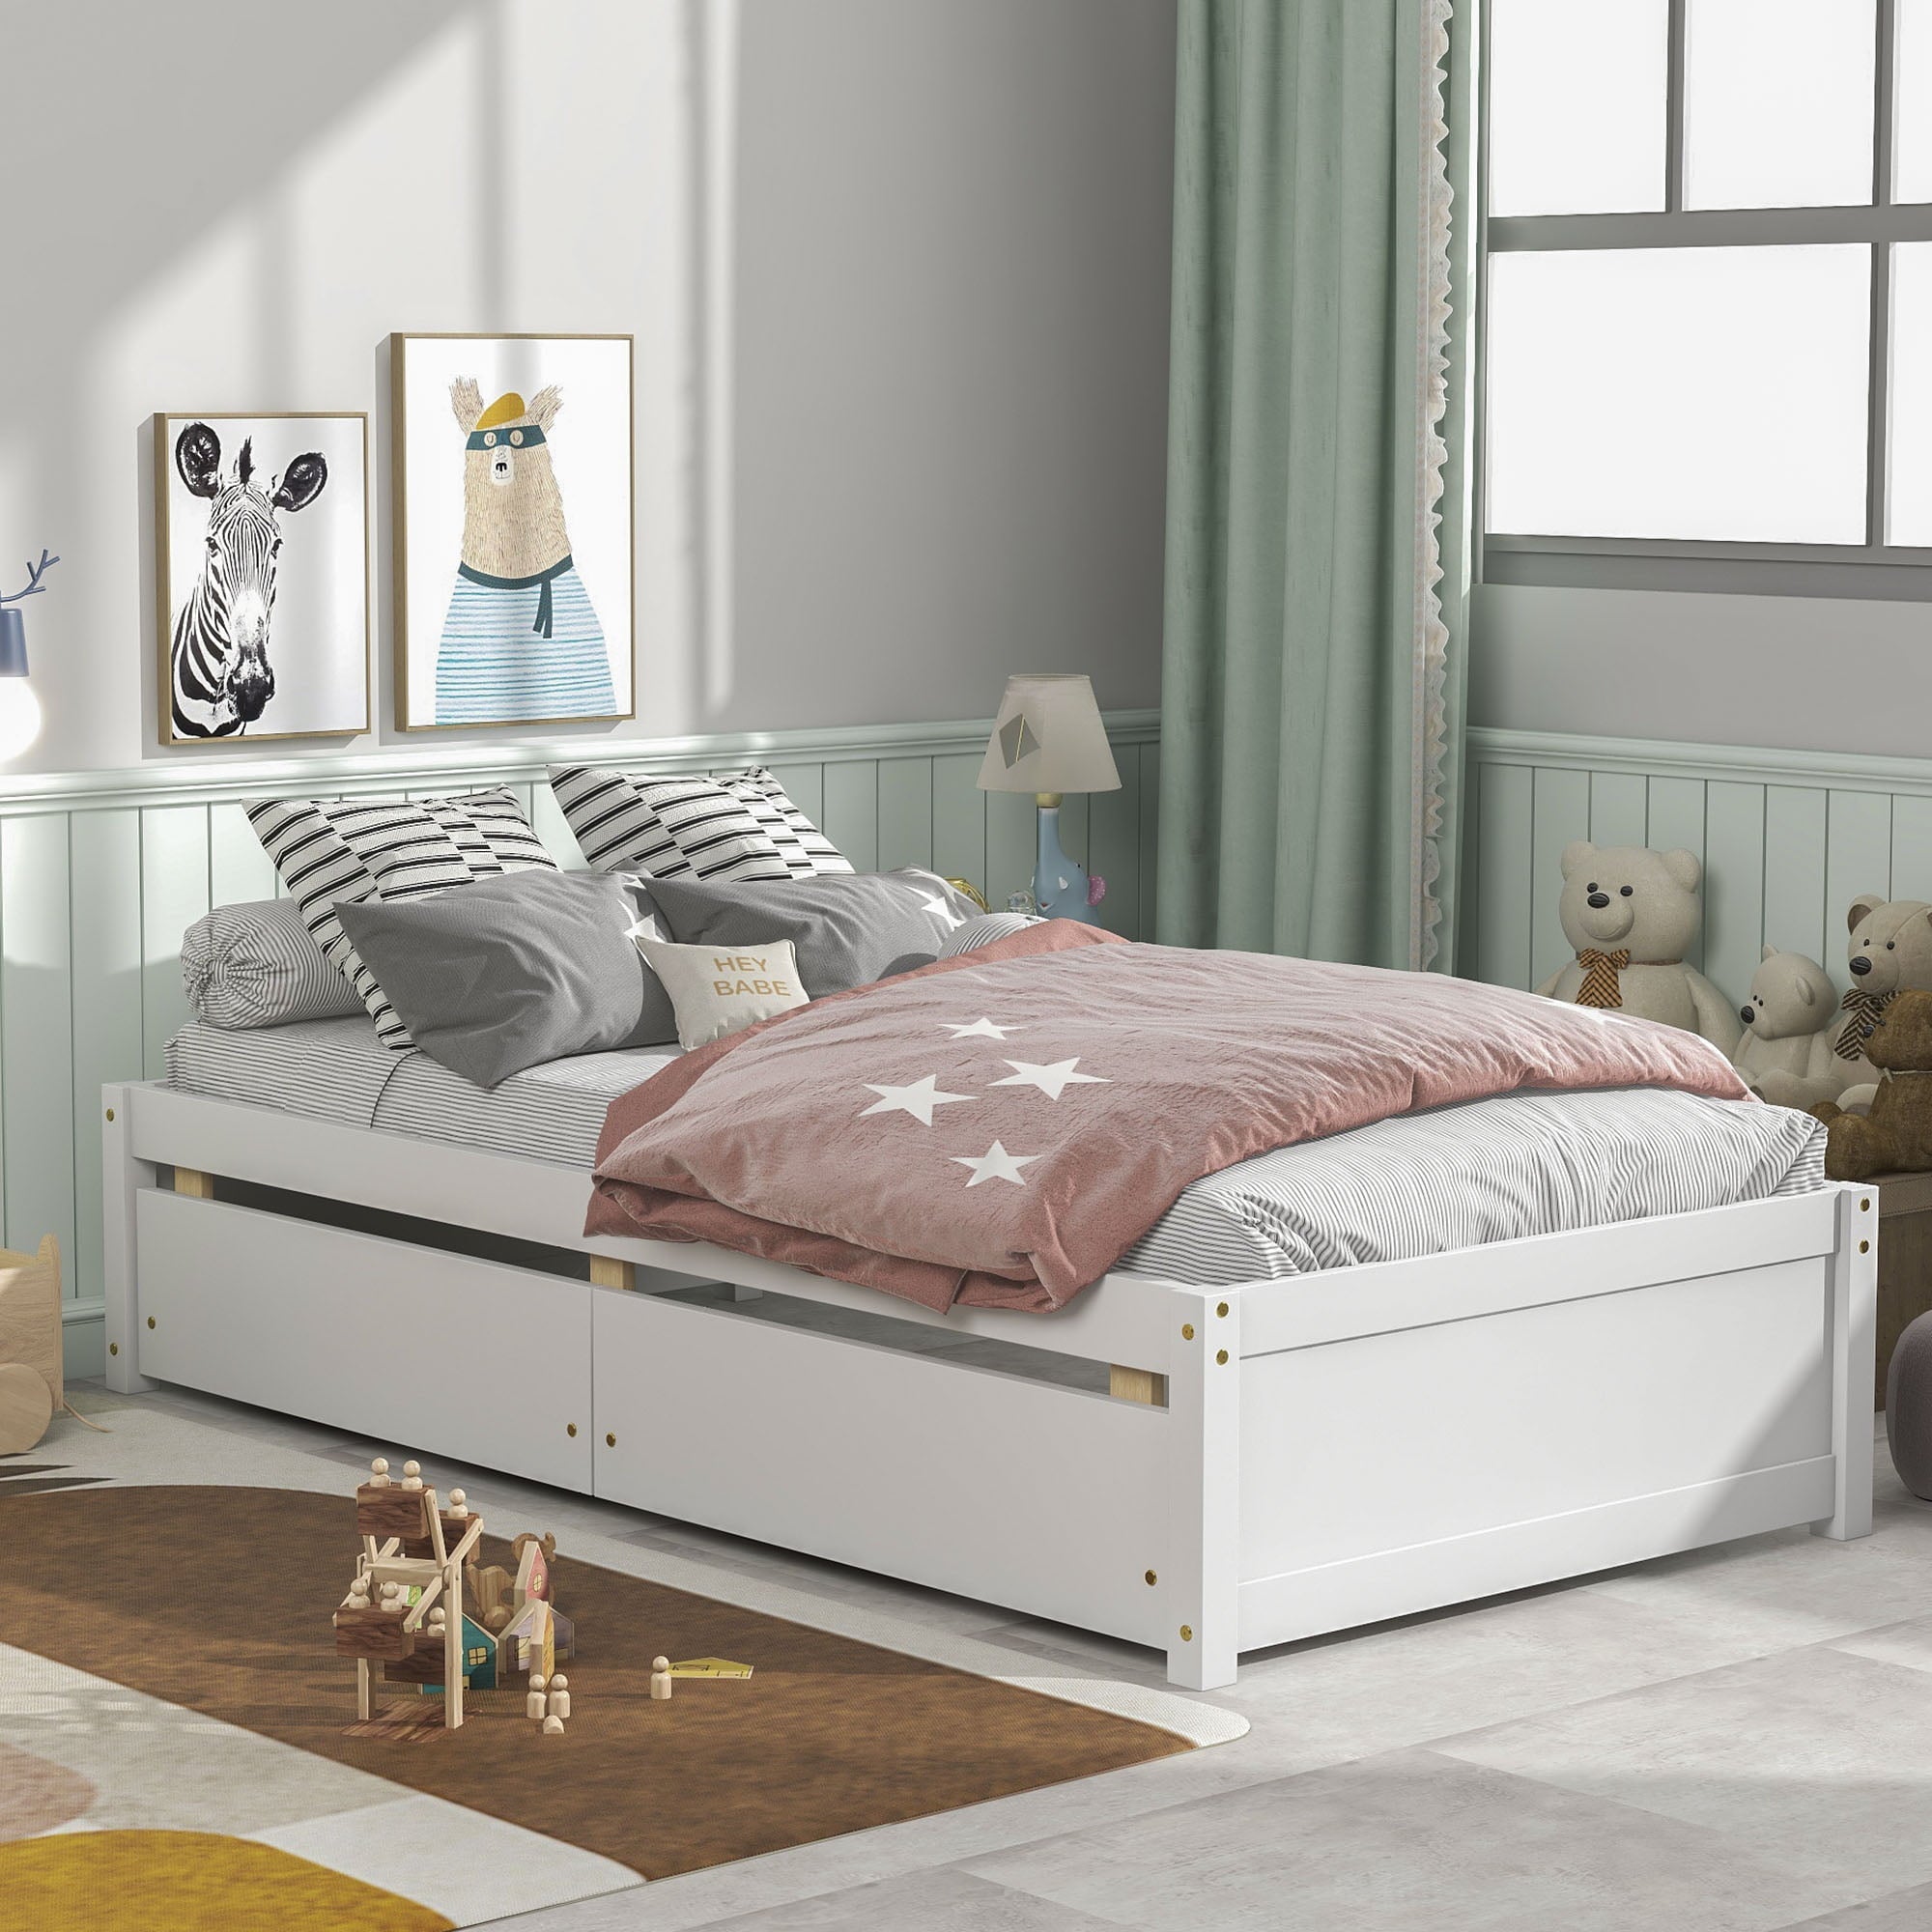 Twin Platform Bed Frame with Storage Drawers, Kids Twin Size Bed Frame No Box Spring Needed, Solid Wood Platform Beds with Two Drawers, Modern Single Bed Bedroom Furniture, White, J1159